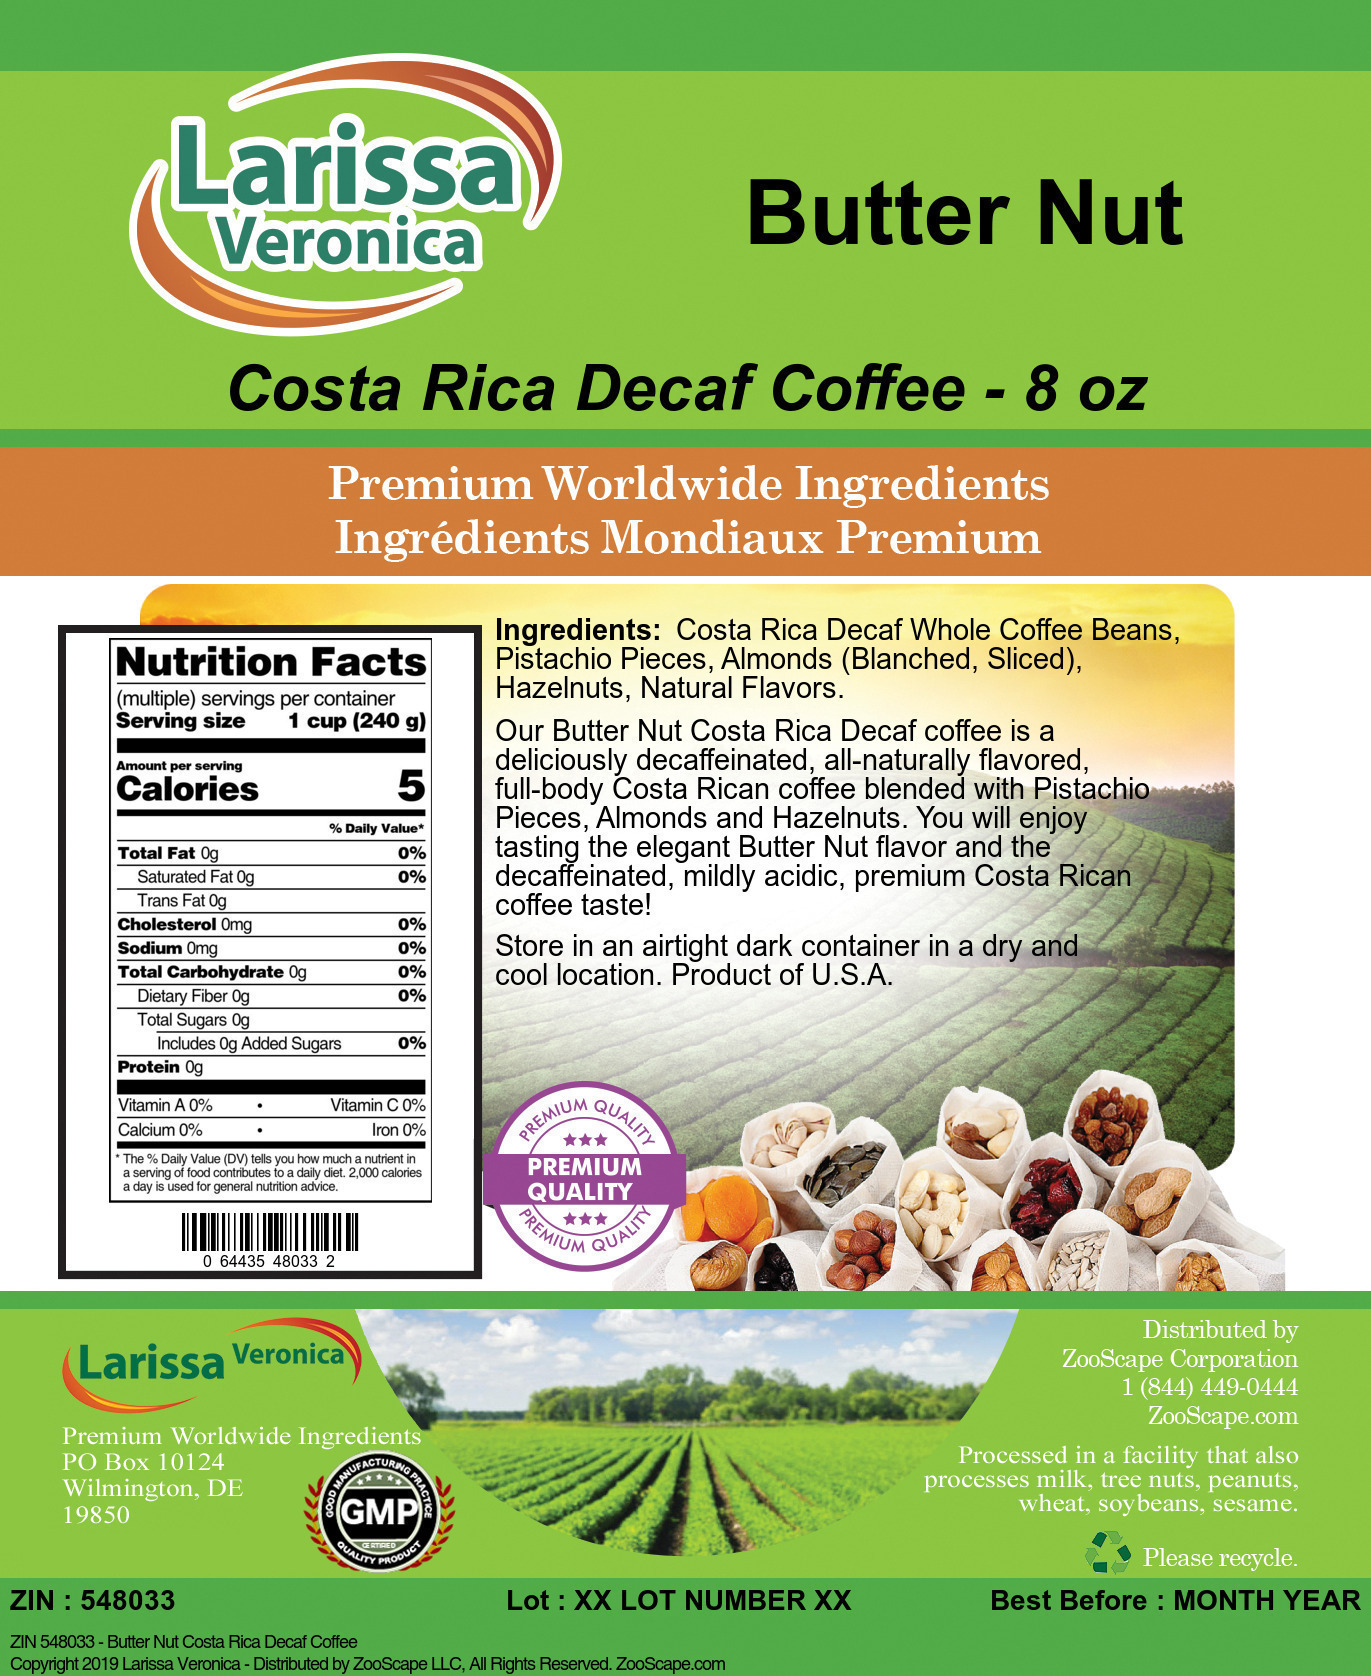 Butter Nut Costa Rica Decaf Coffee - Label